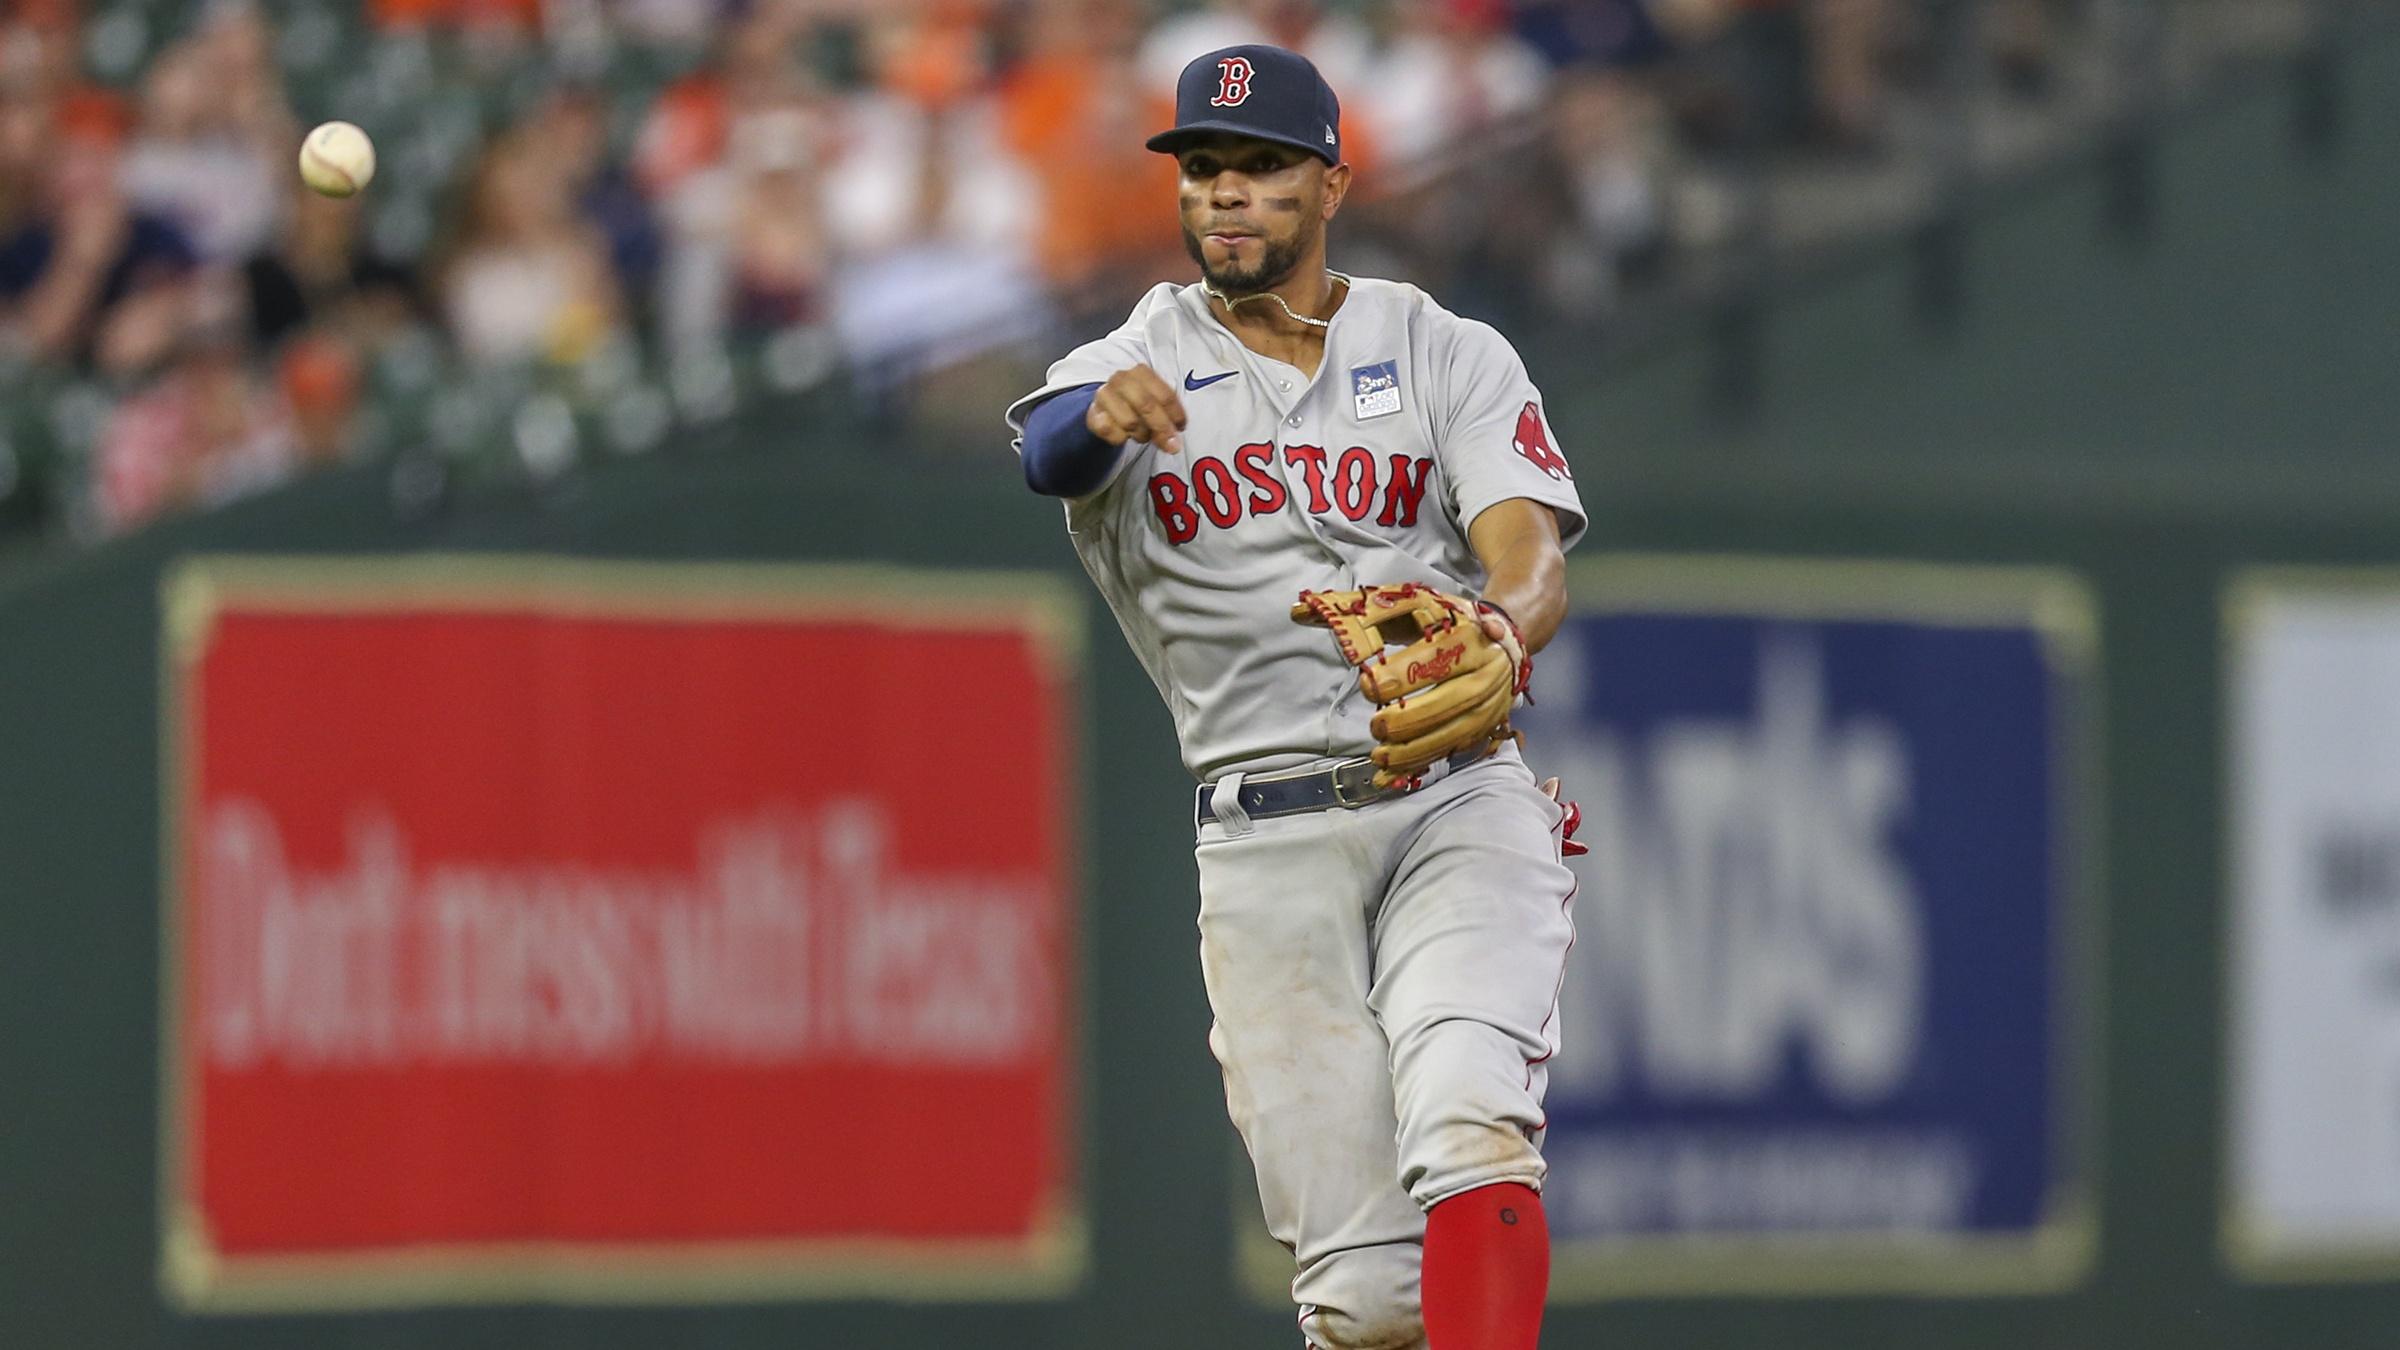 Jun 2, 2021; Houston, Texas, USA; Boston Red Sox shortstop Xander Bogaerts (2) throws out a Houston Astros in the eighth inning at Minute Maid Park. / © Thomas Shea-USA TODAY Sports